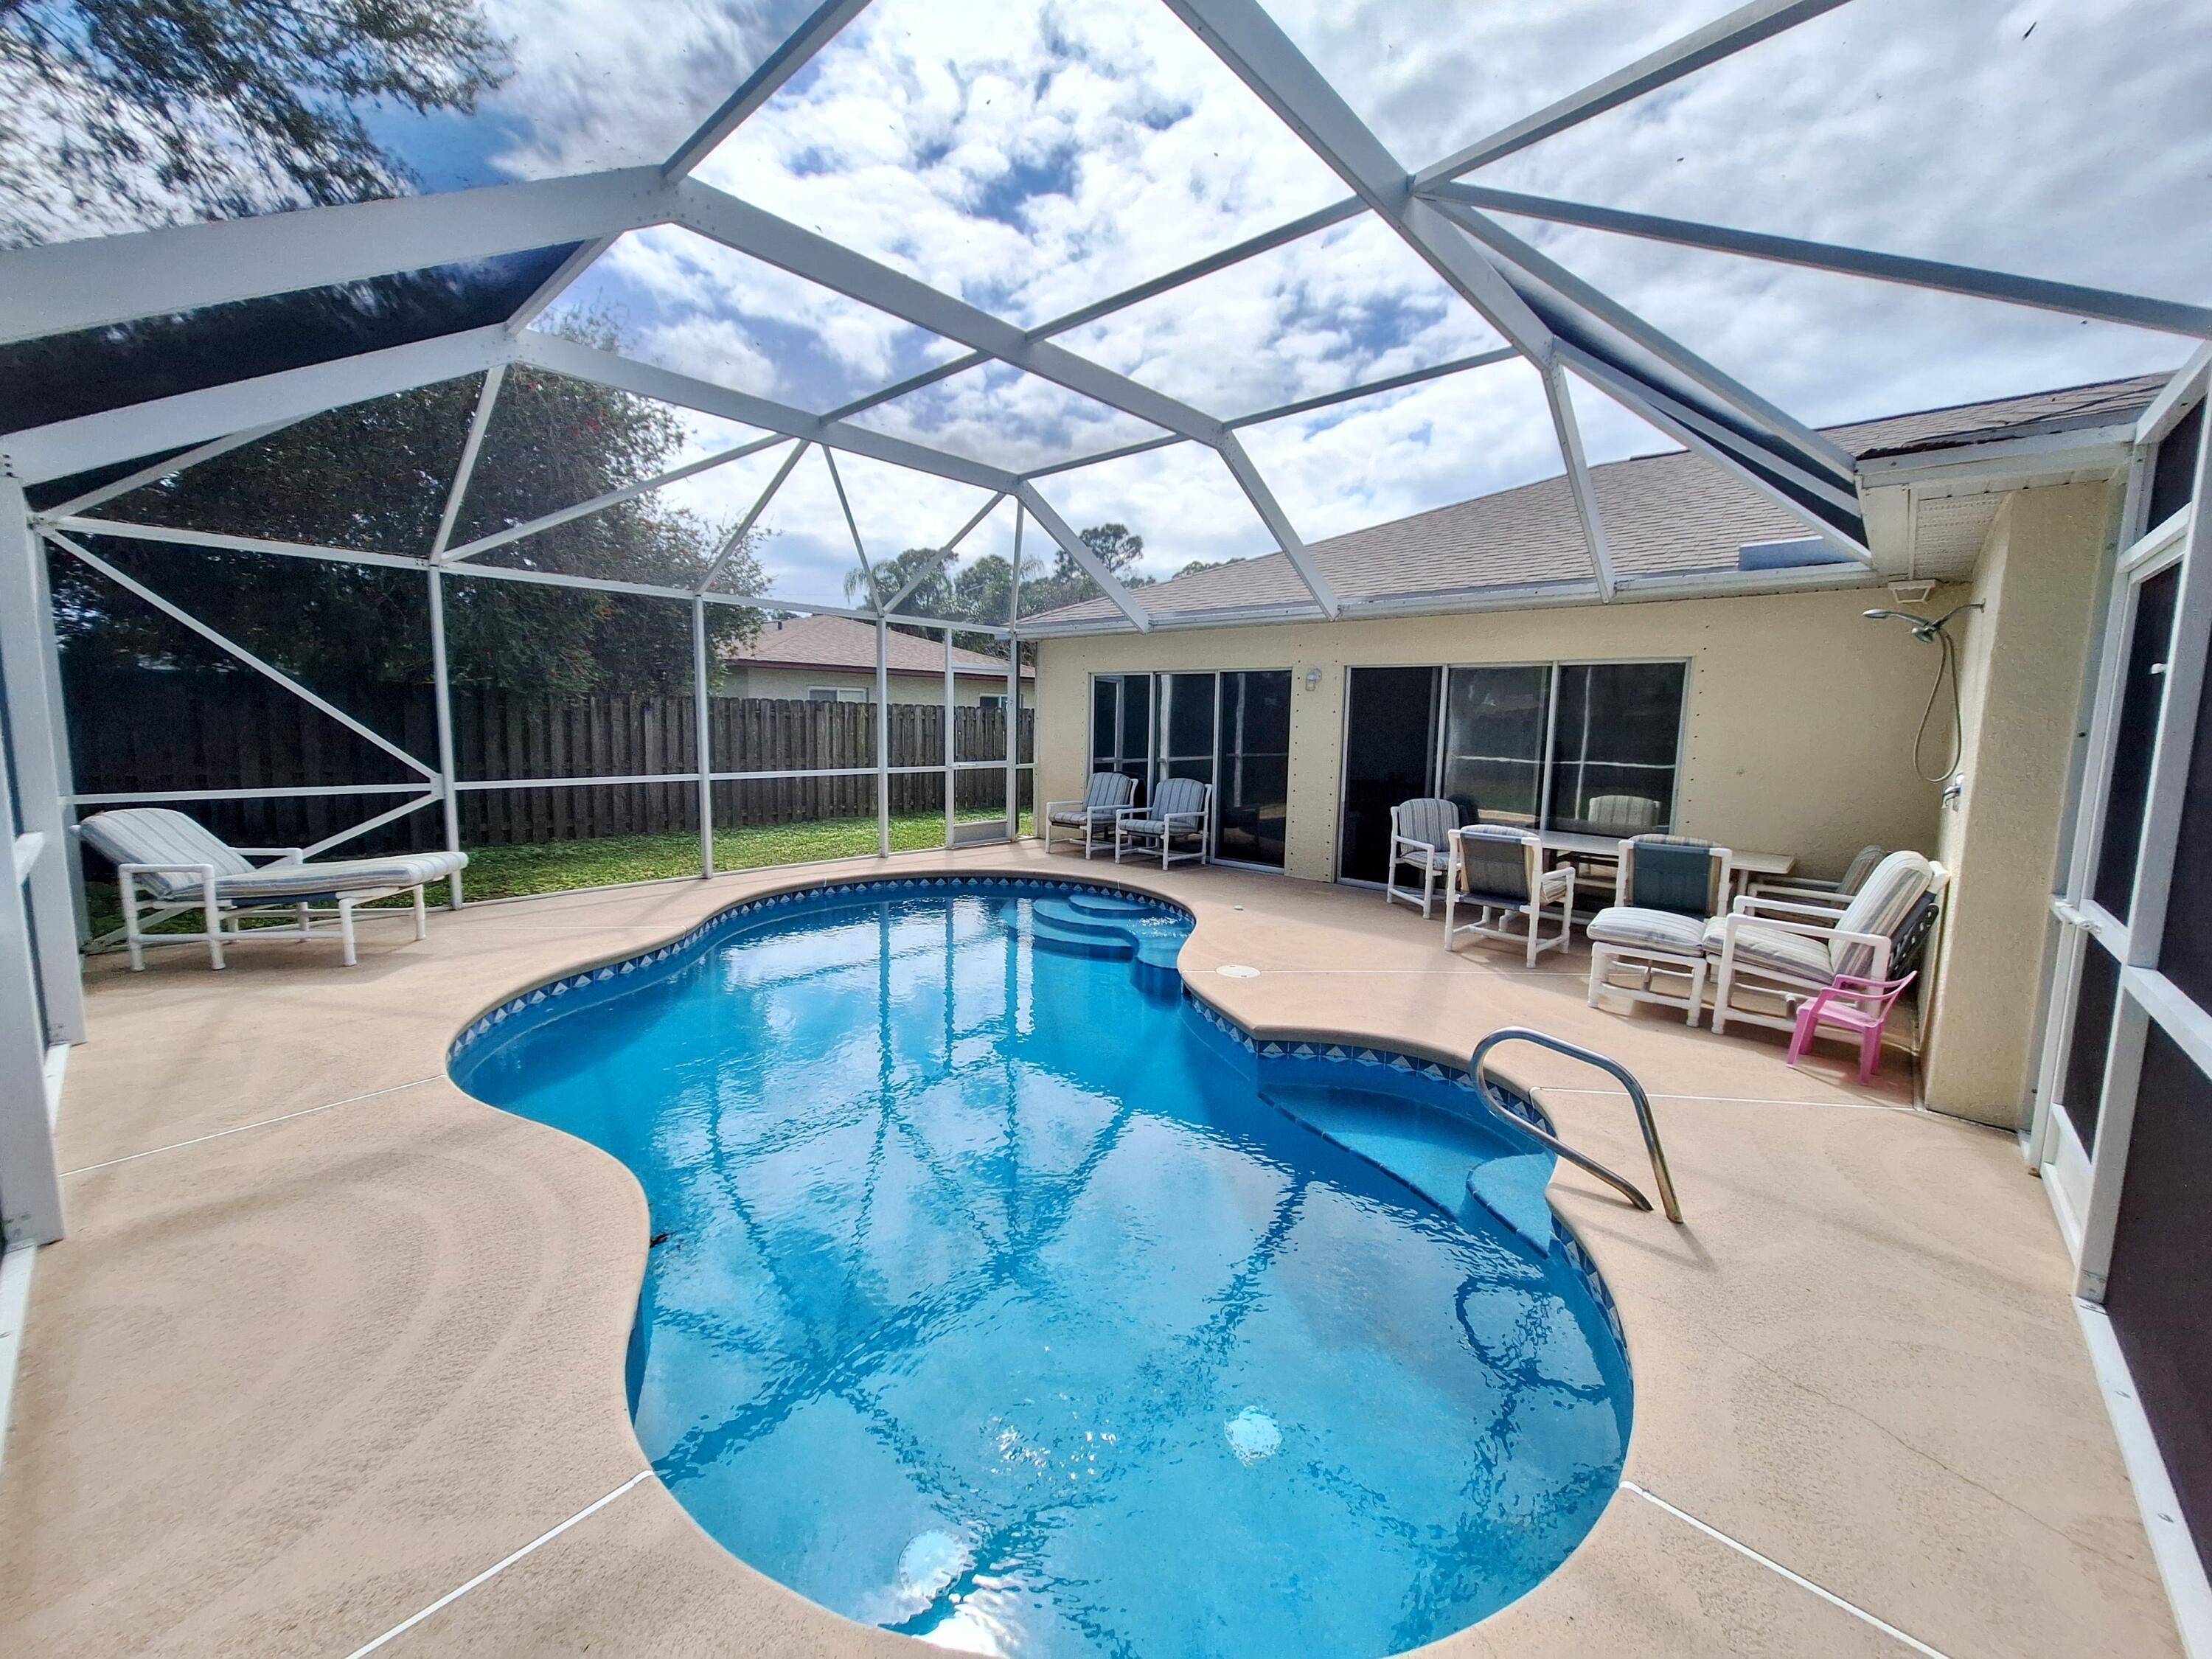 a view of a swimming pool with outdoor seating